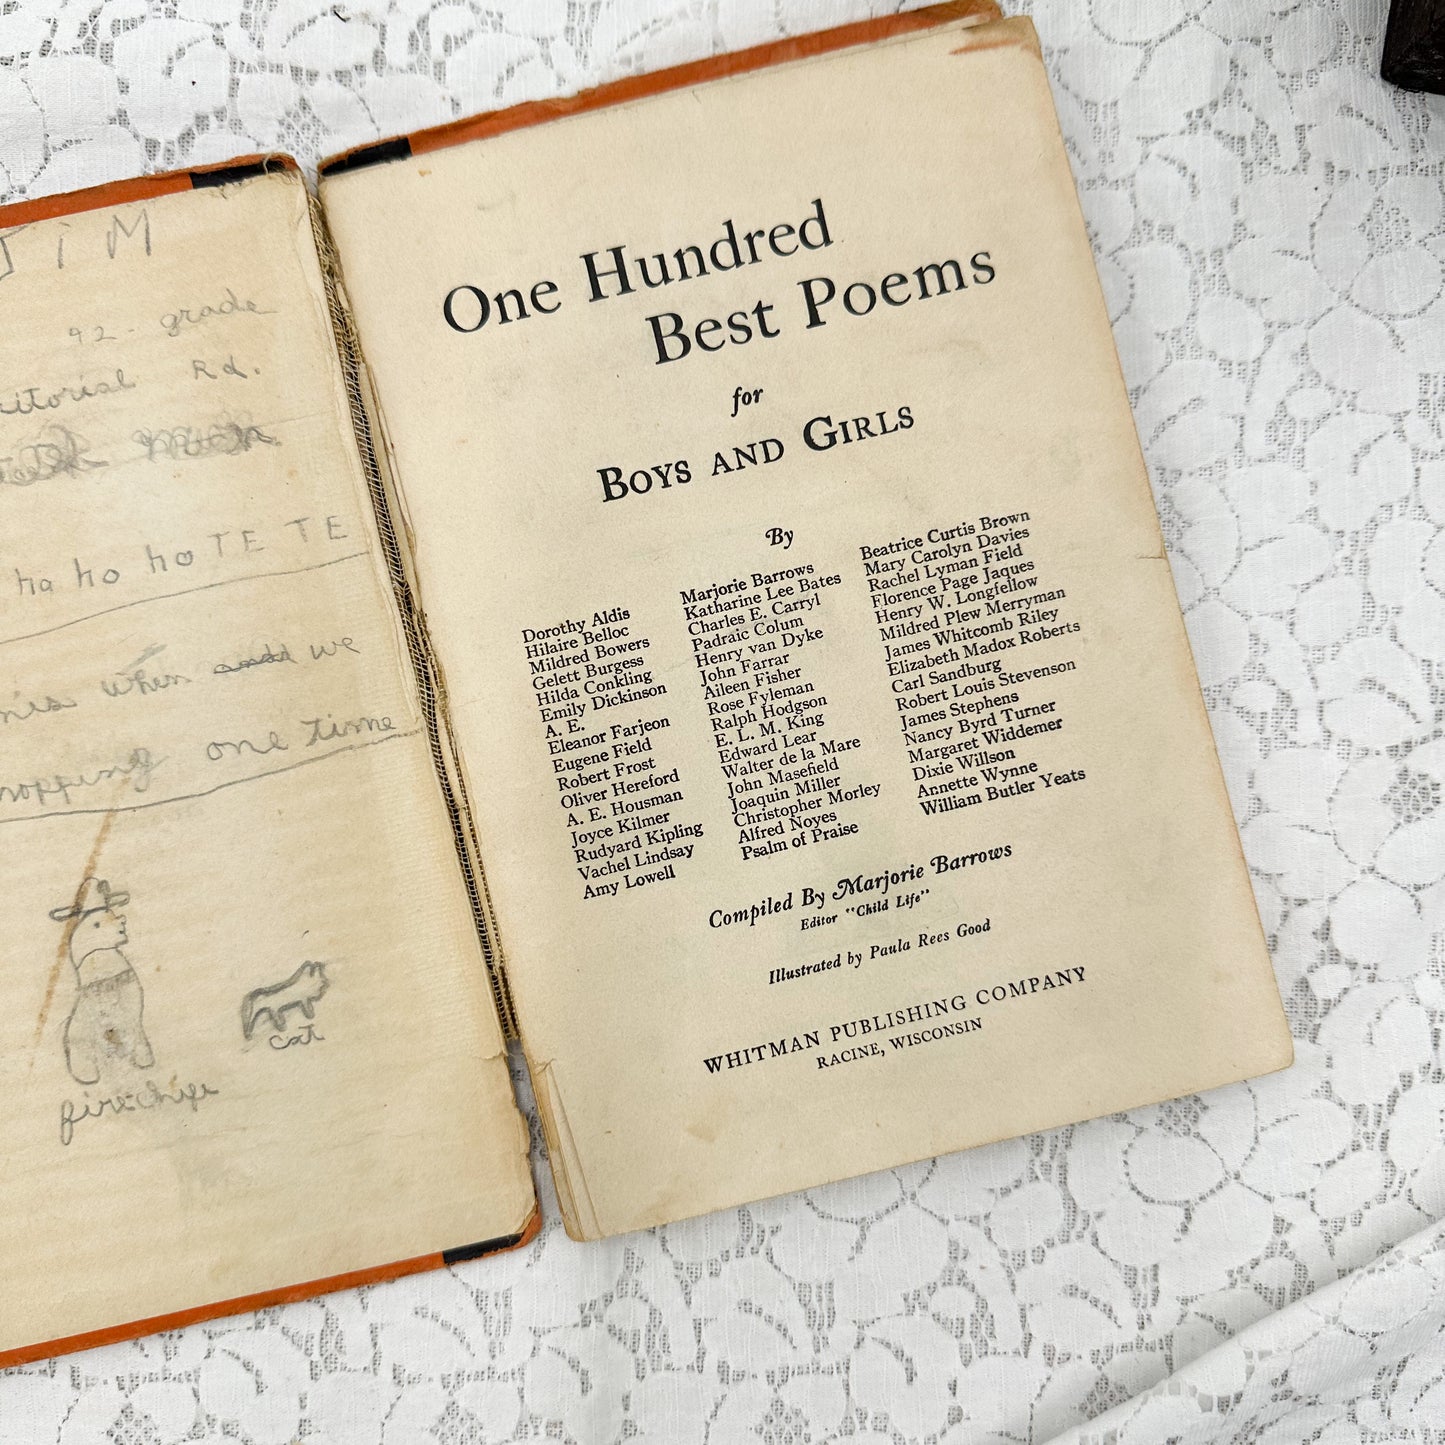 One Hundred Best Poems for Boys and Girls